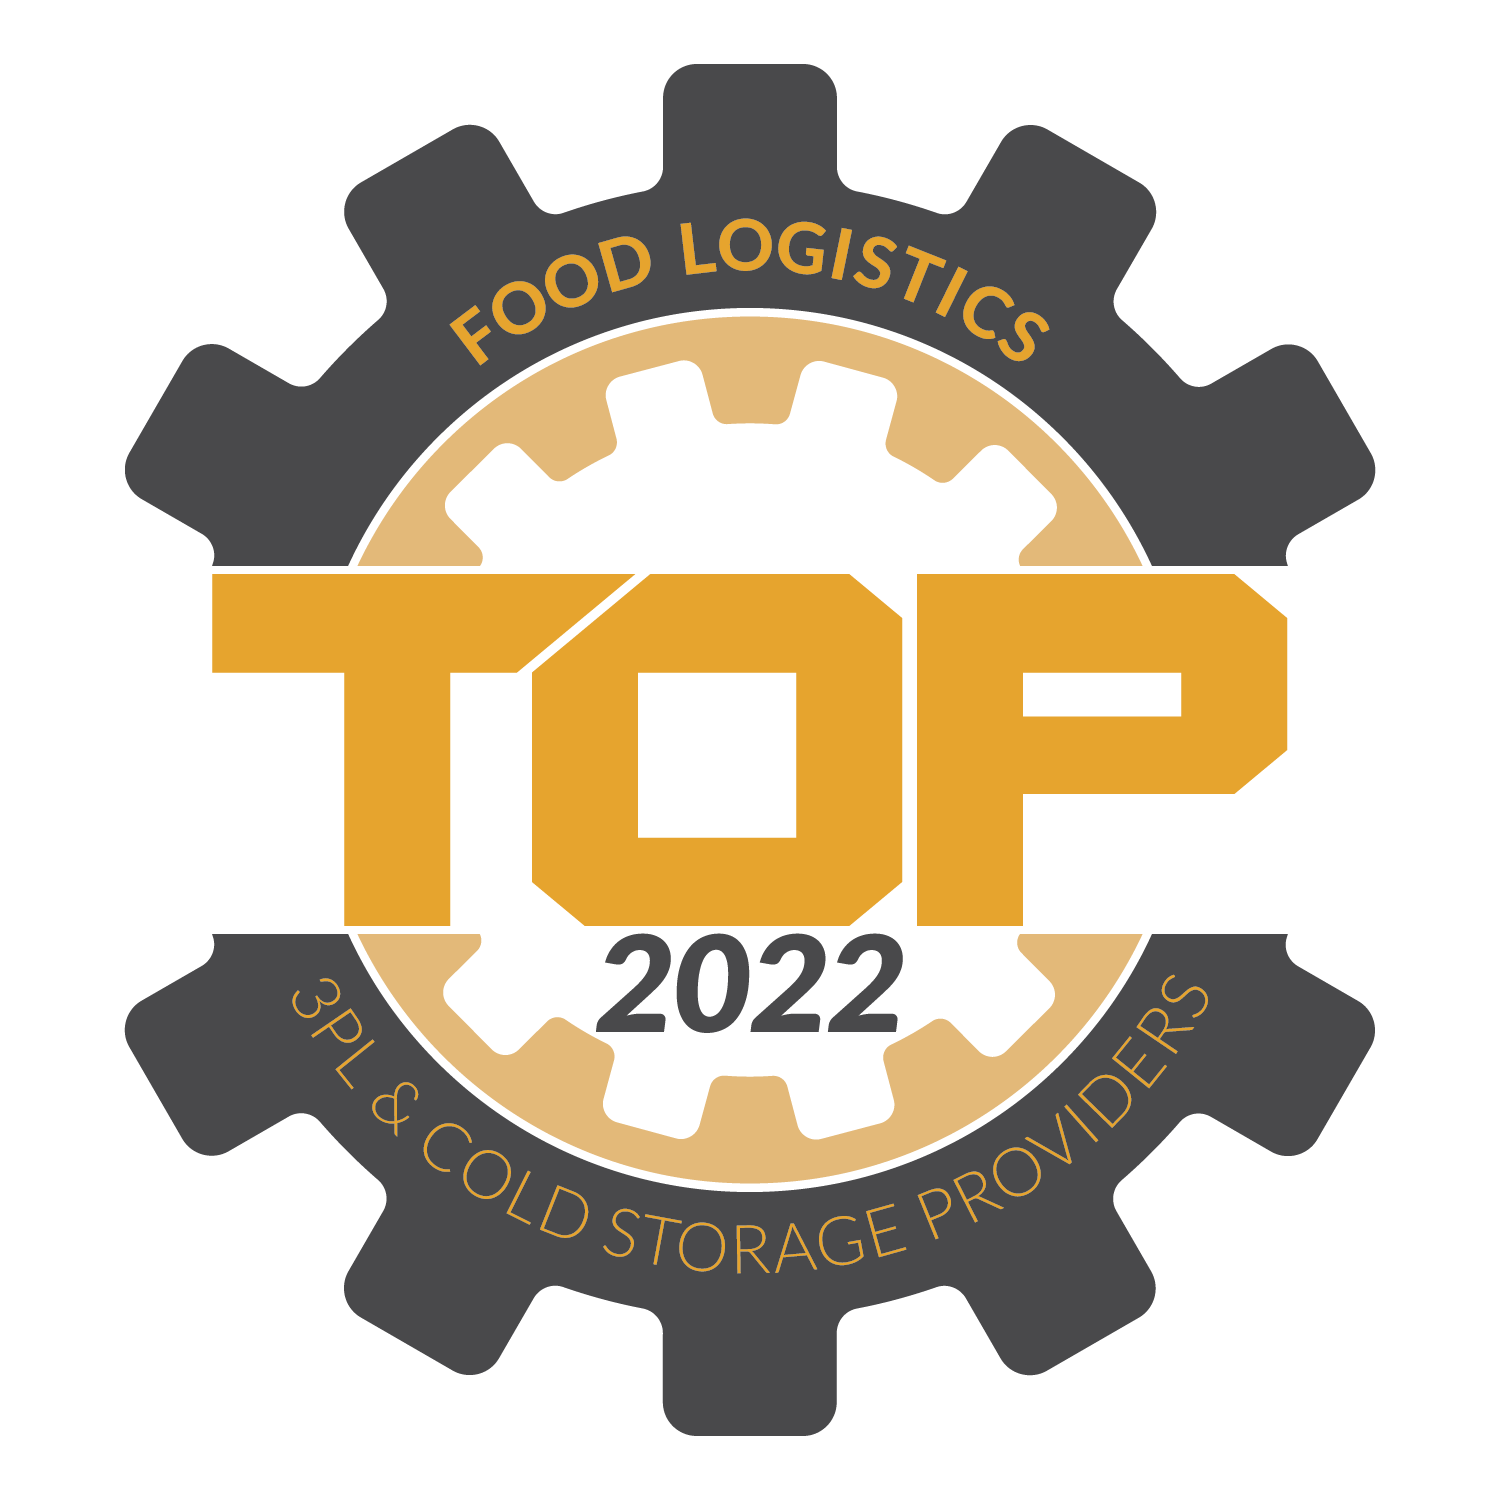 The Shippers Group 2022 Food Logistics Top 3PL & Cold Storage Provider